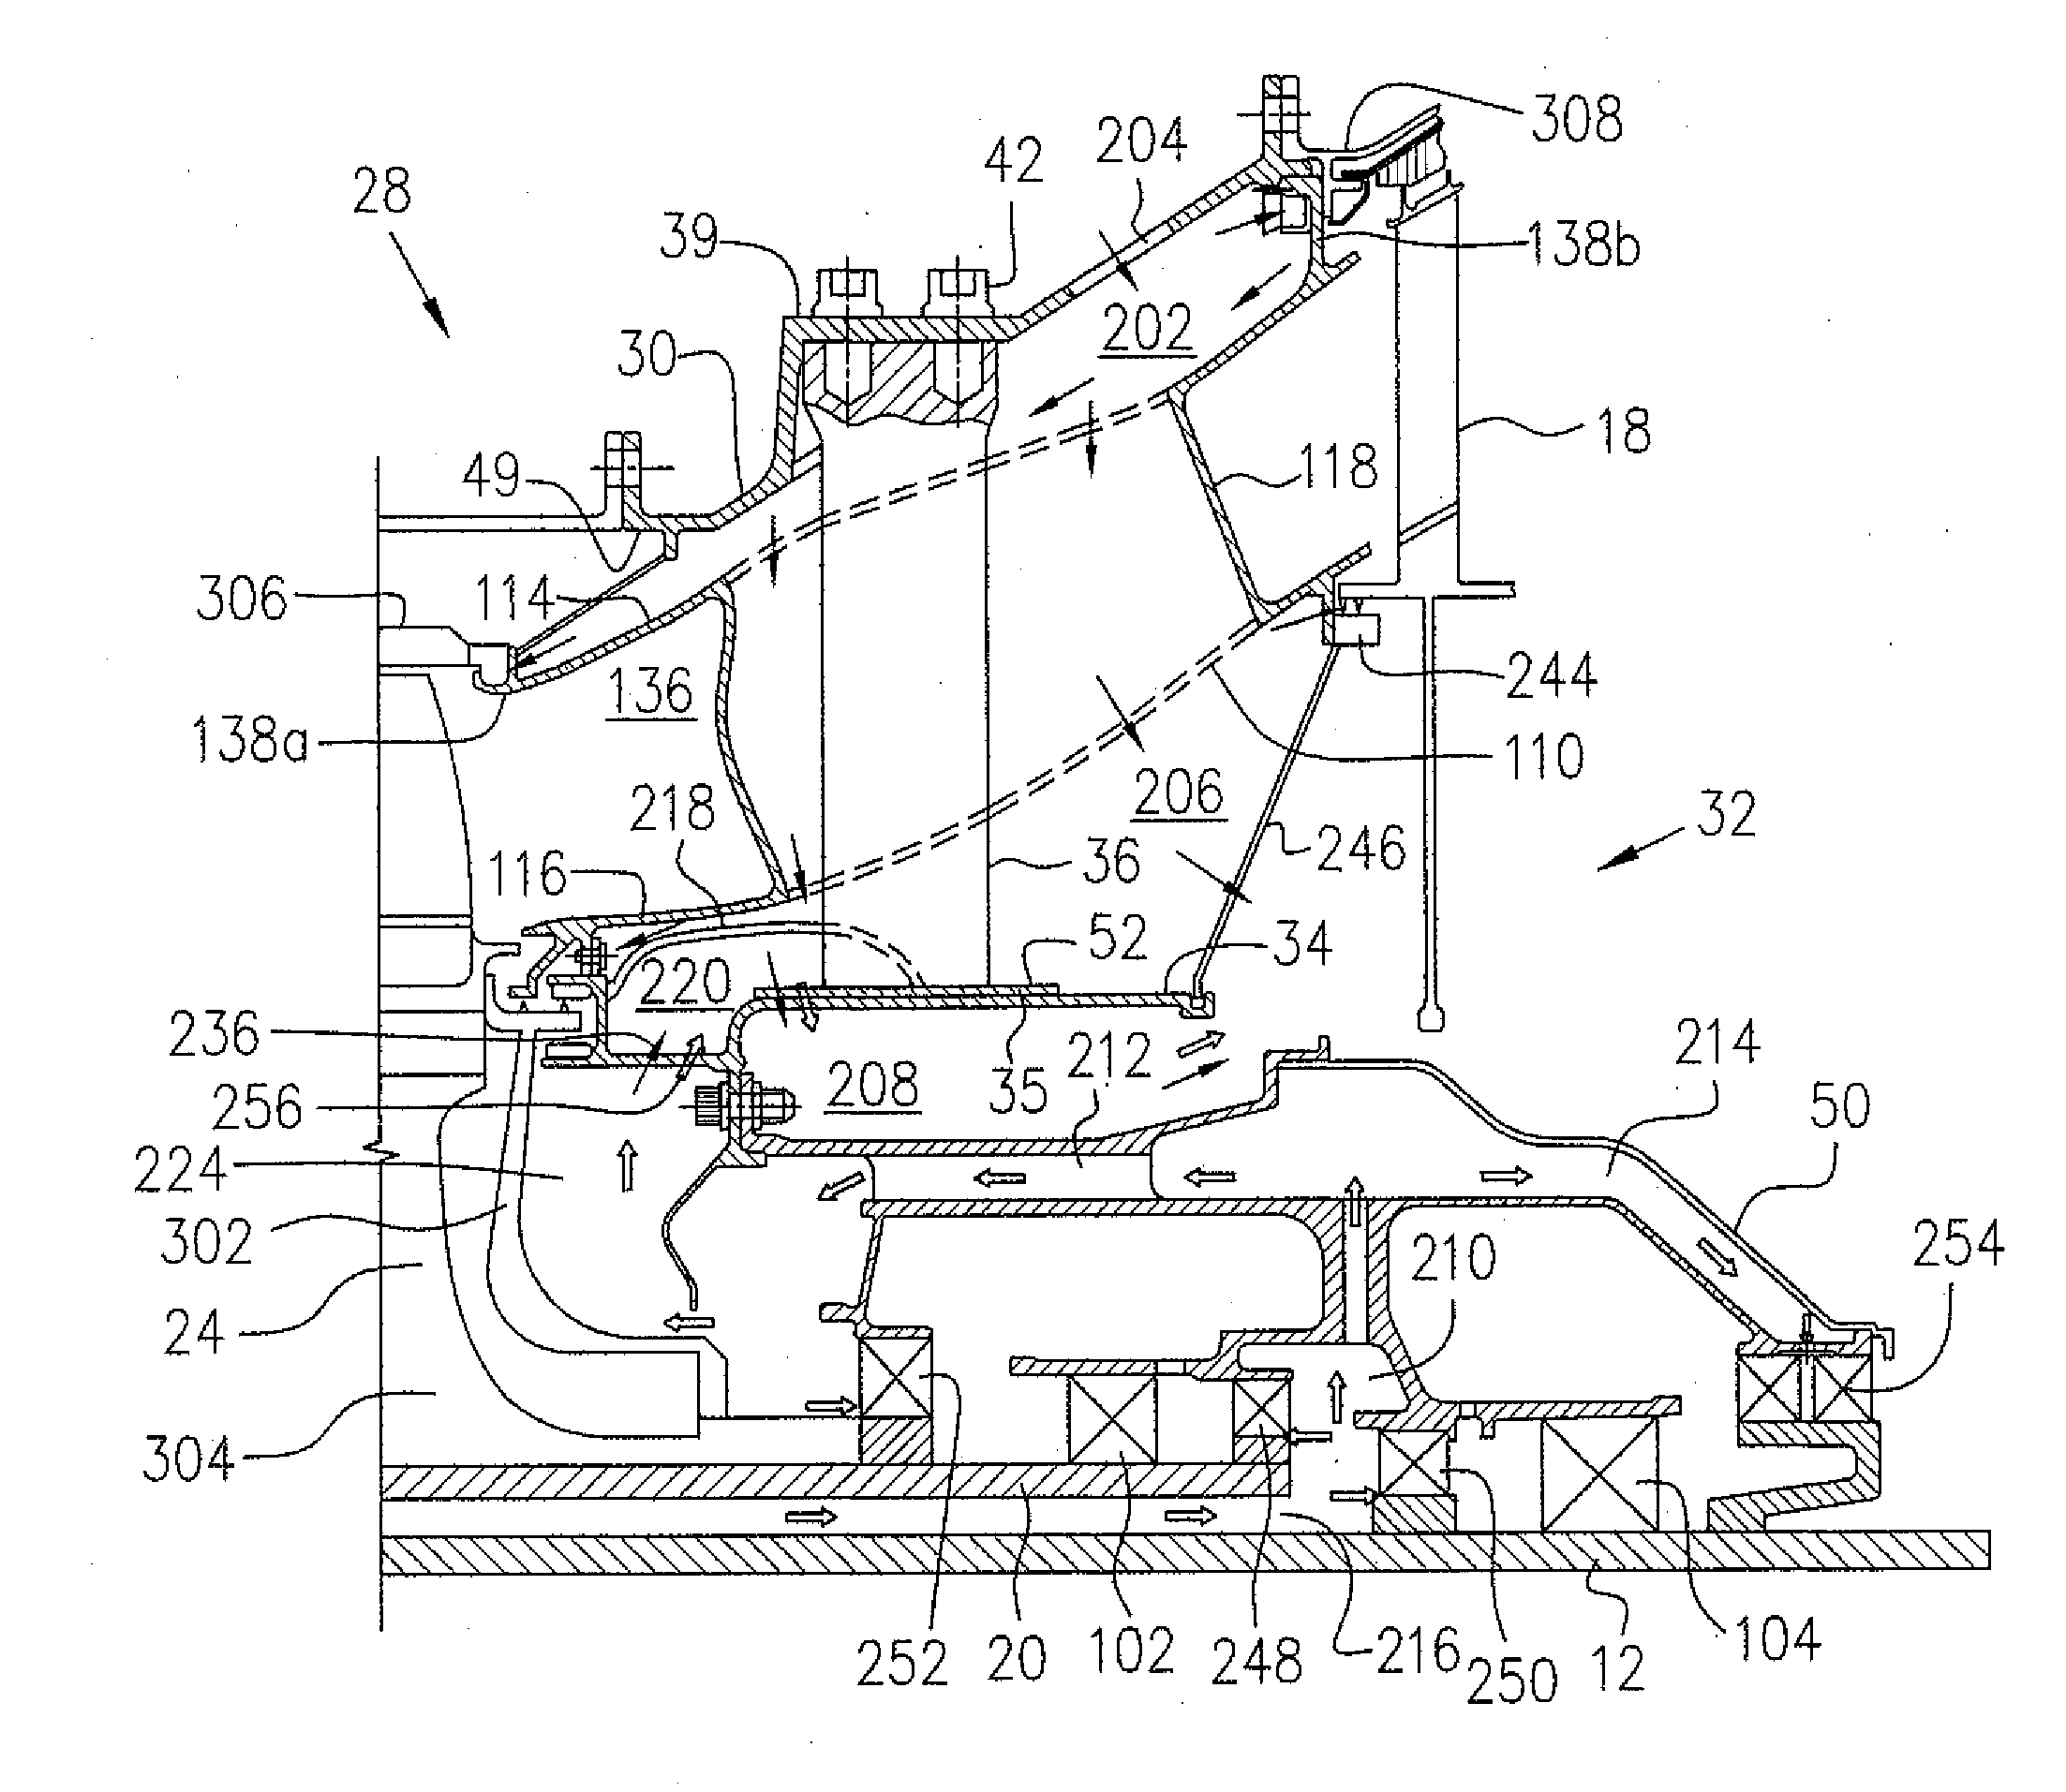 Cooling air system for mid turbine frame